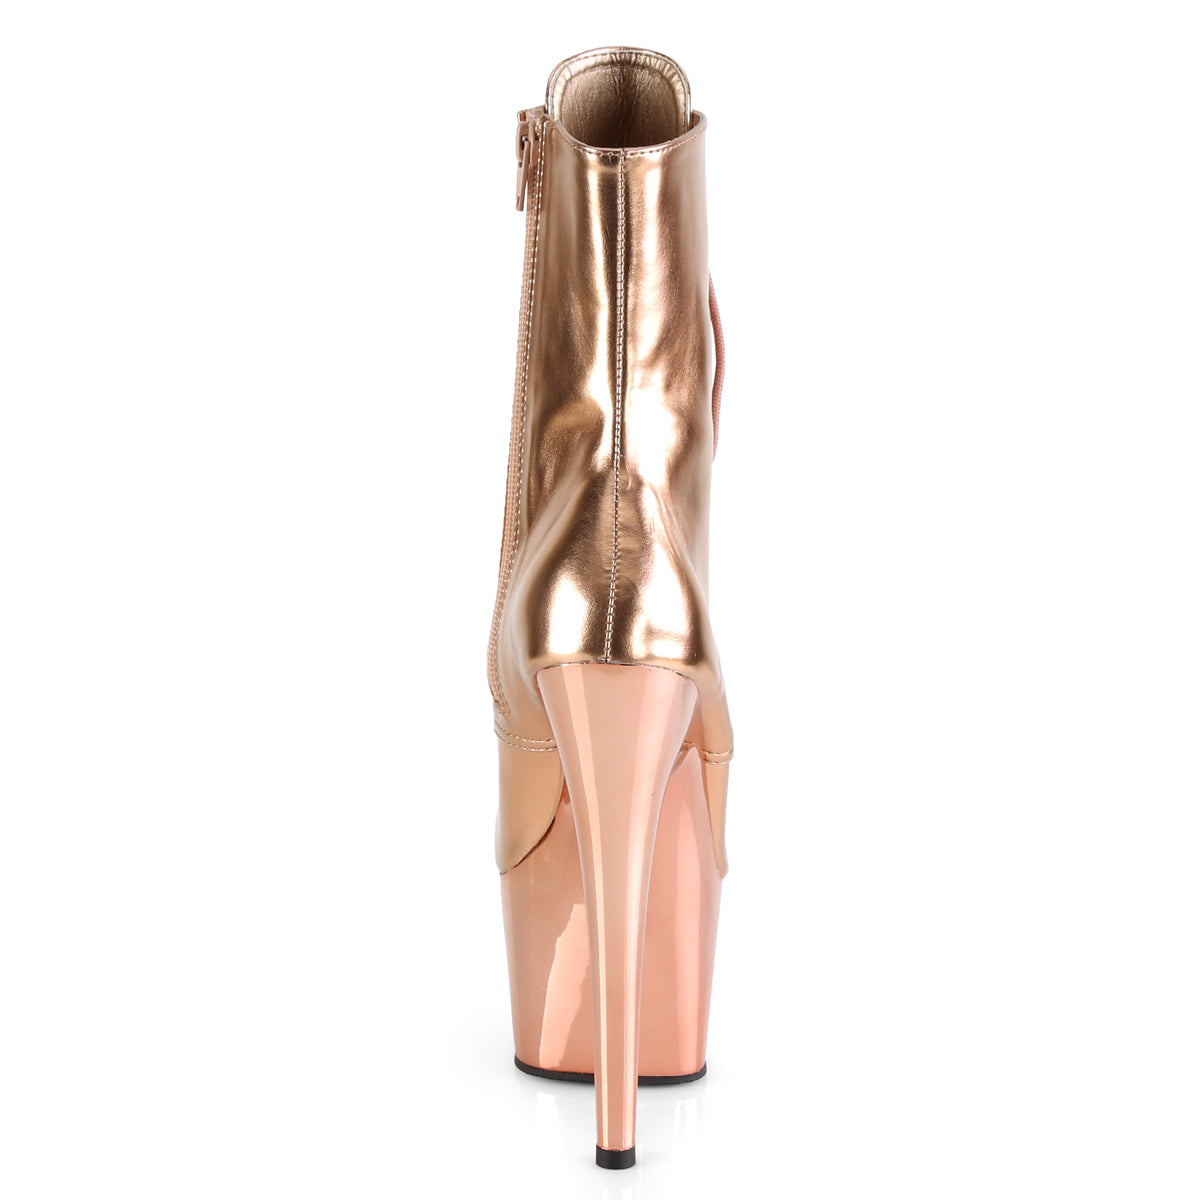 PLEASER ADORE-1020 ROSE GOLD CHROME 7 INCH HIGH HEEL ANKLE BOOTS SIZE 7 USA SALE